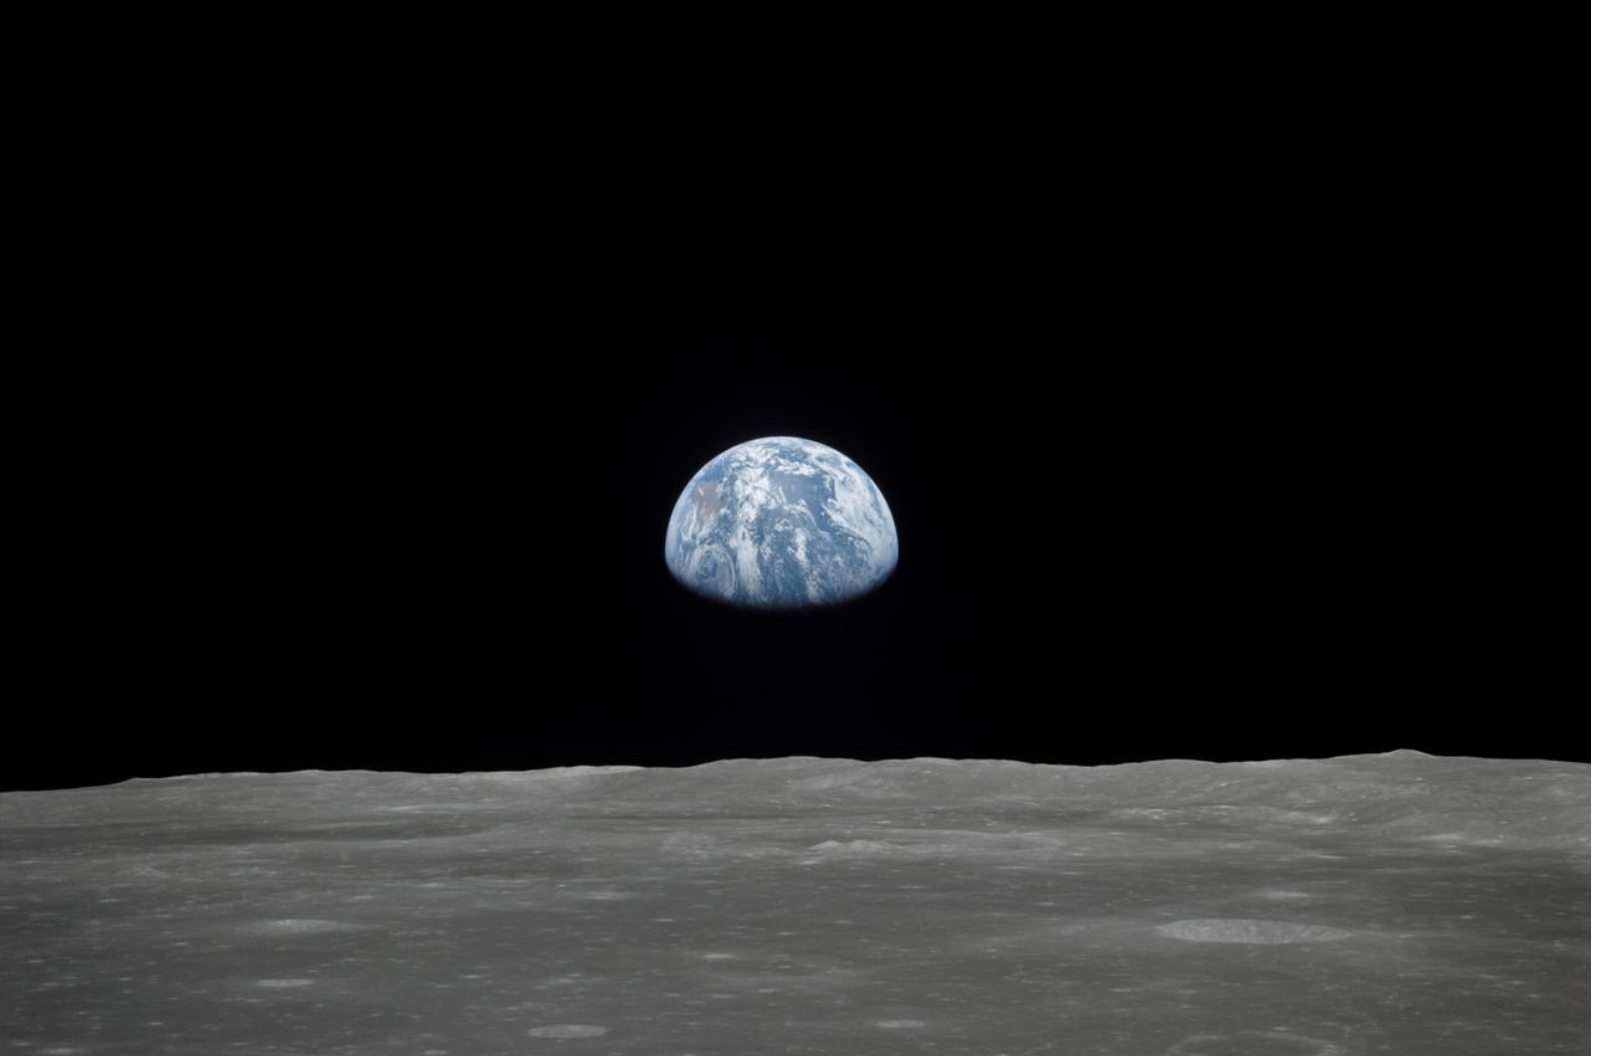 A view of Earth from the surface of the Moon.